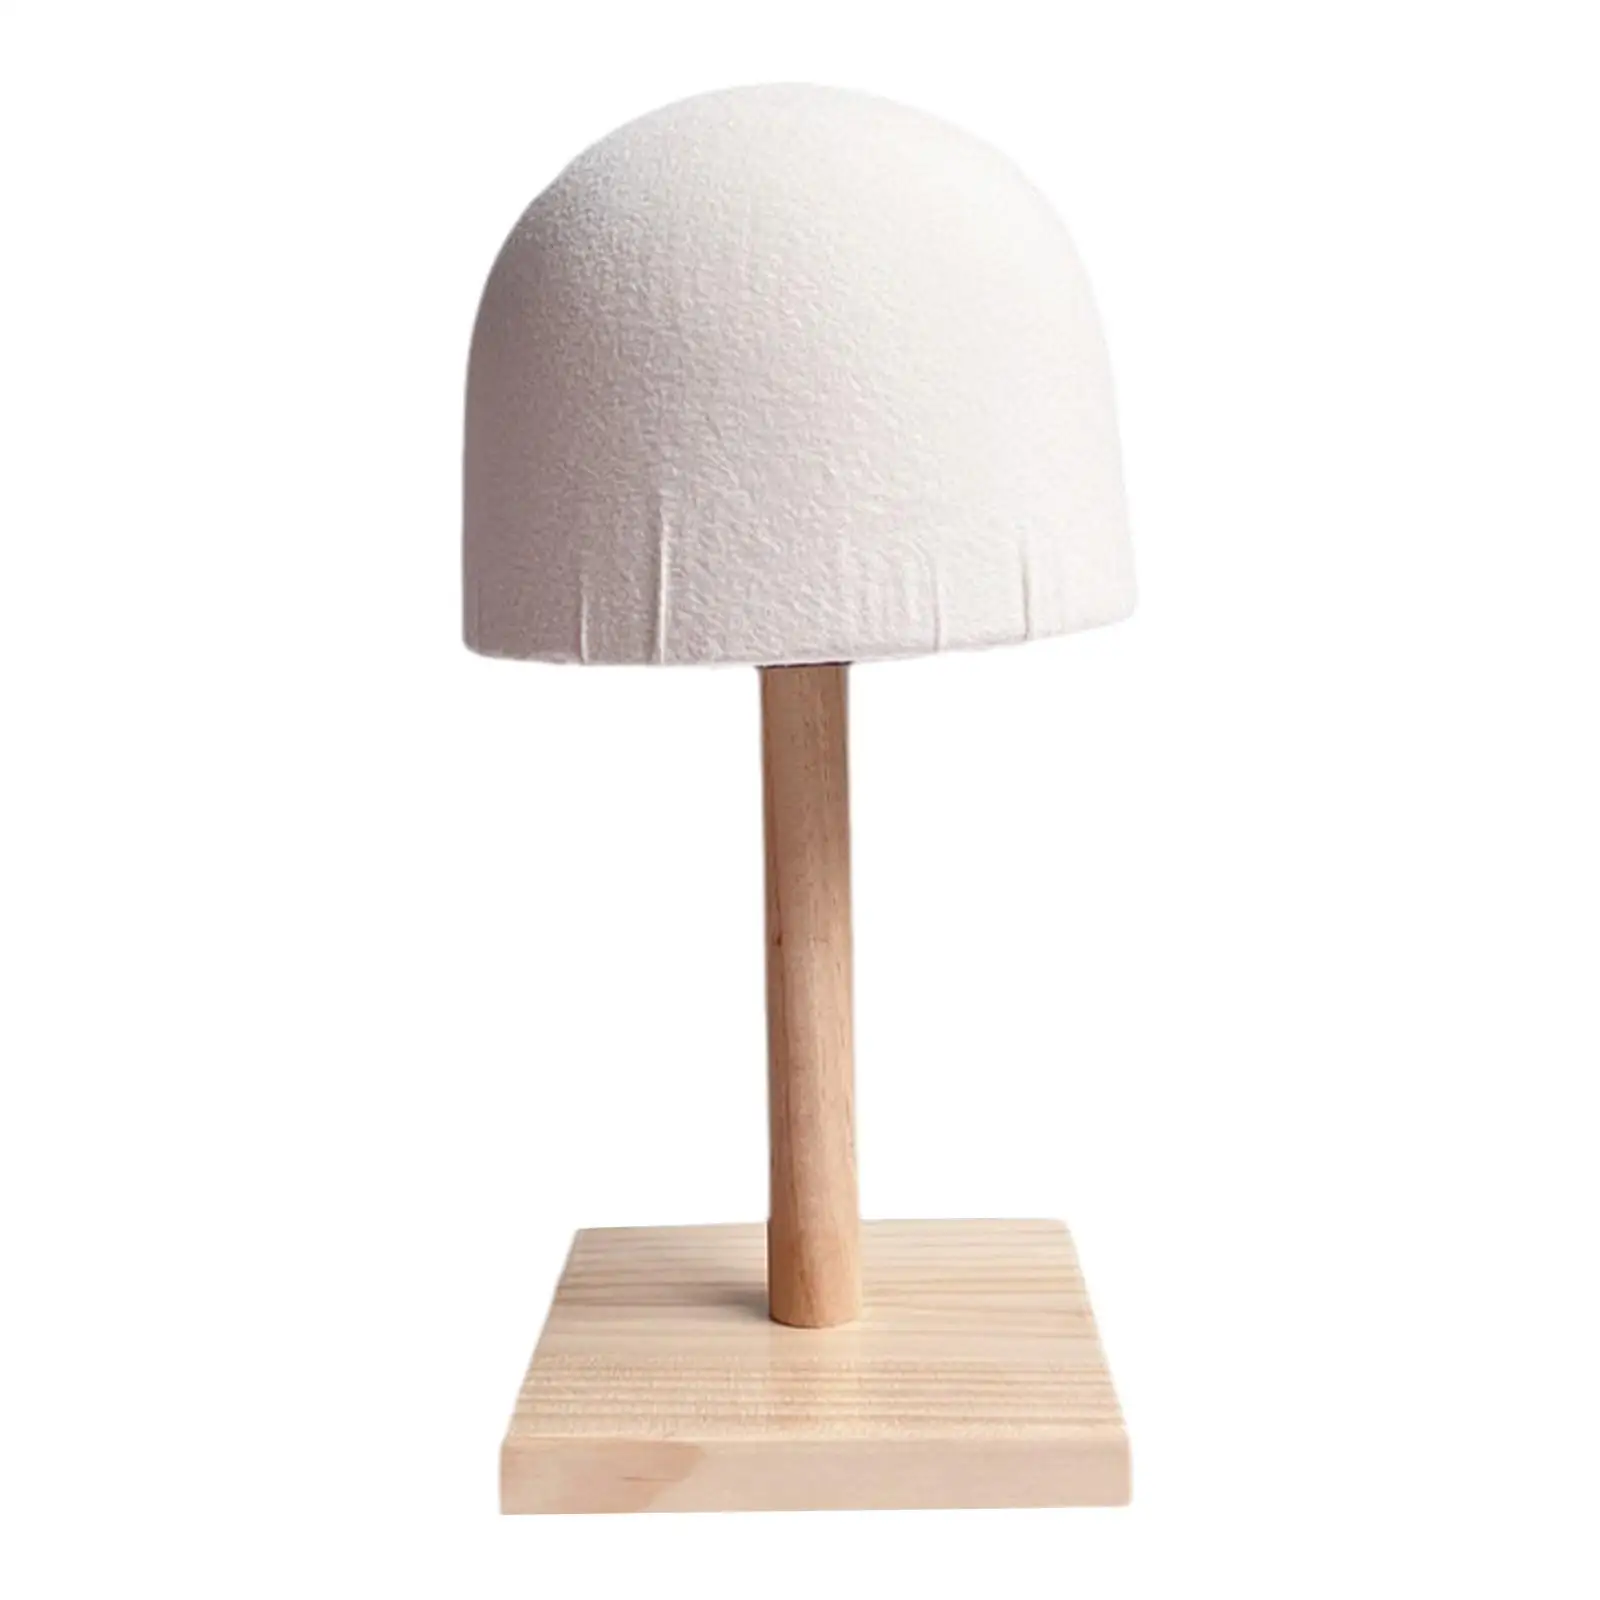 Hat Cap Holder Stand Sturdy Stable Wig Display Stand Non Slip Long Short Wig Display for Travel Shops Styling Women Salons